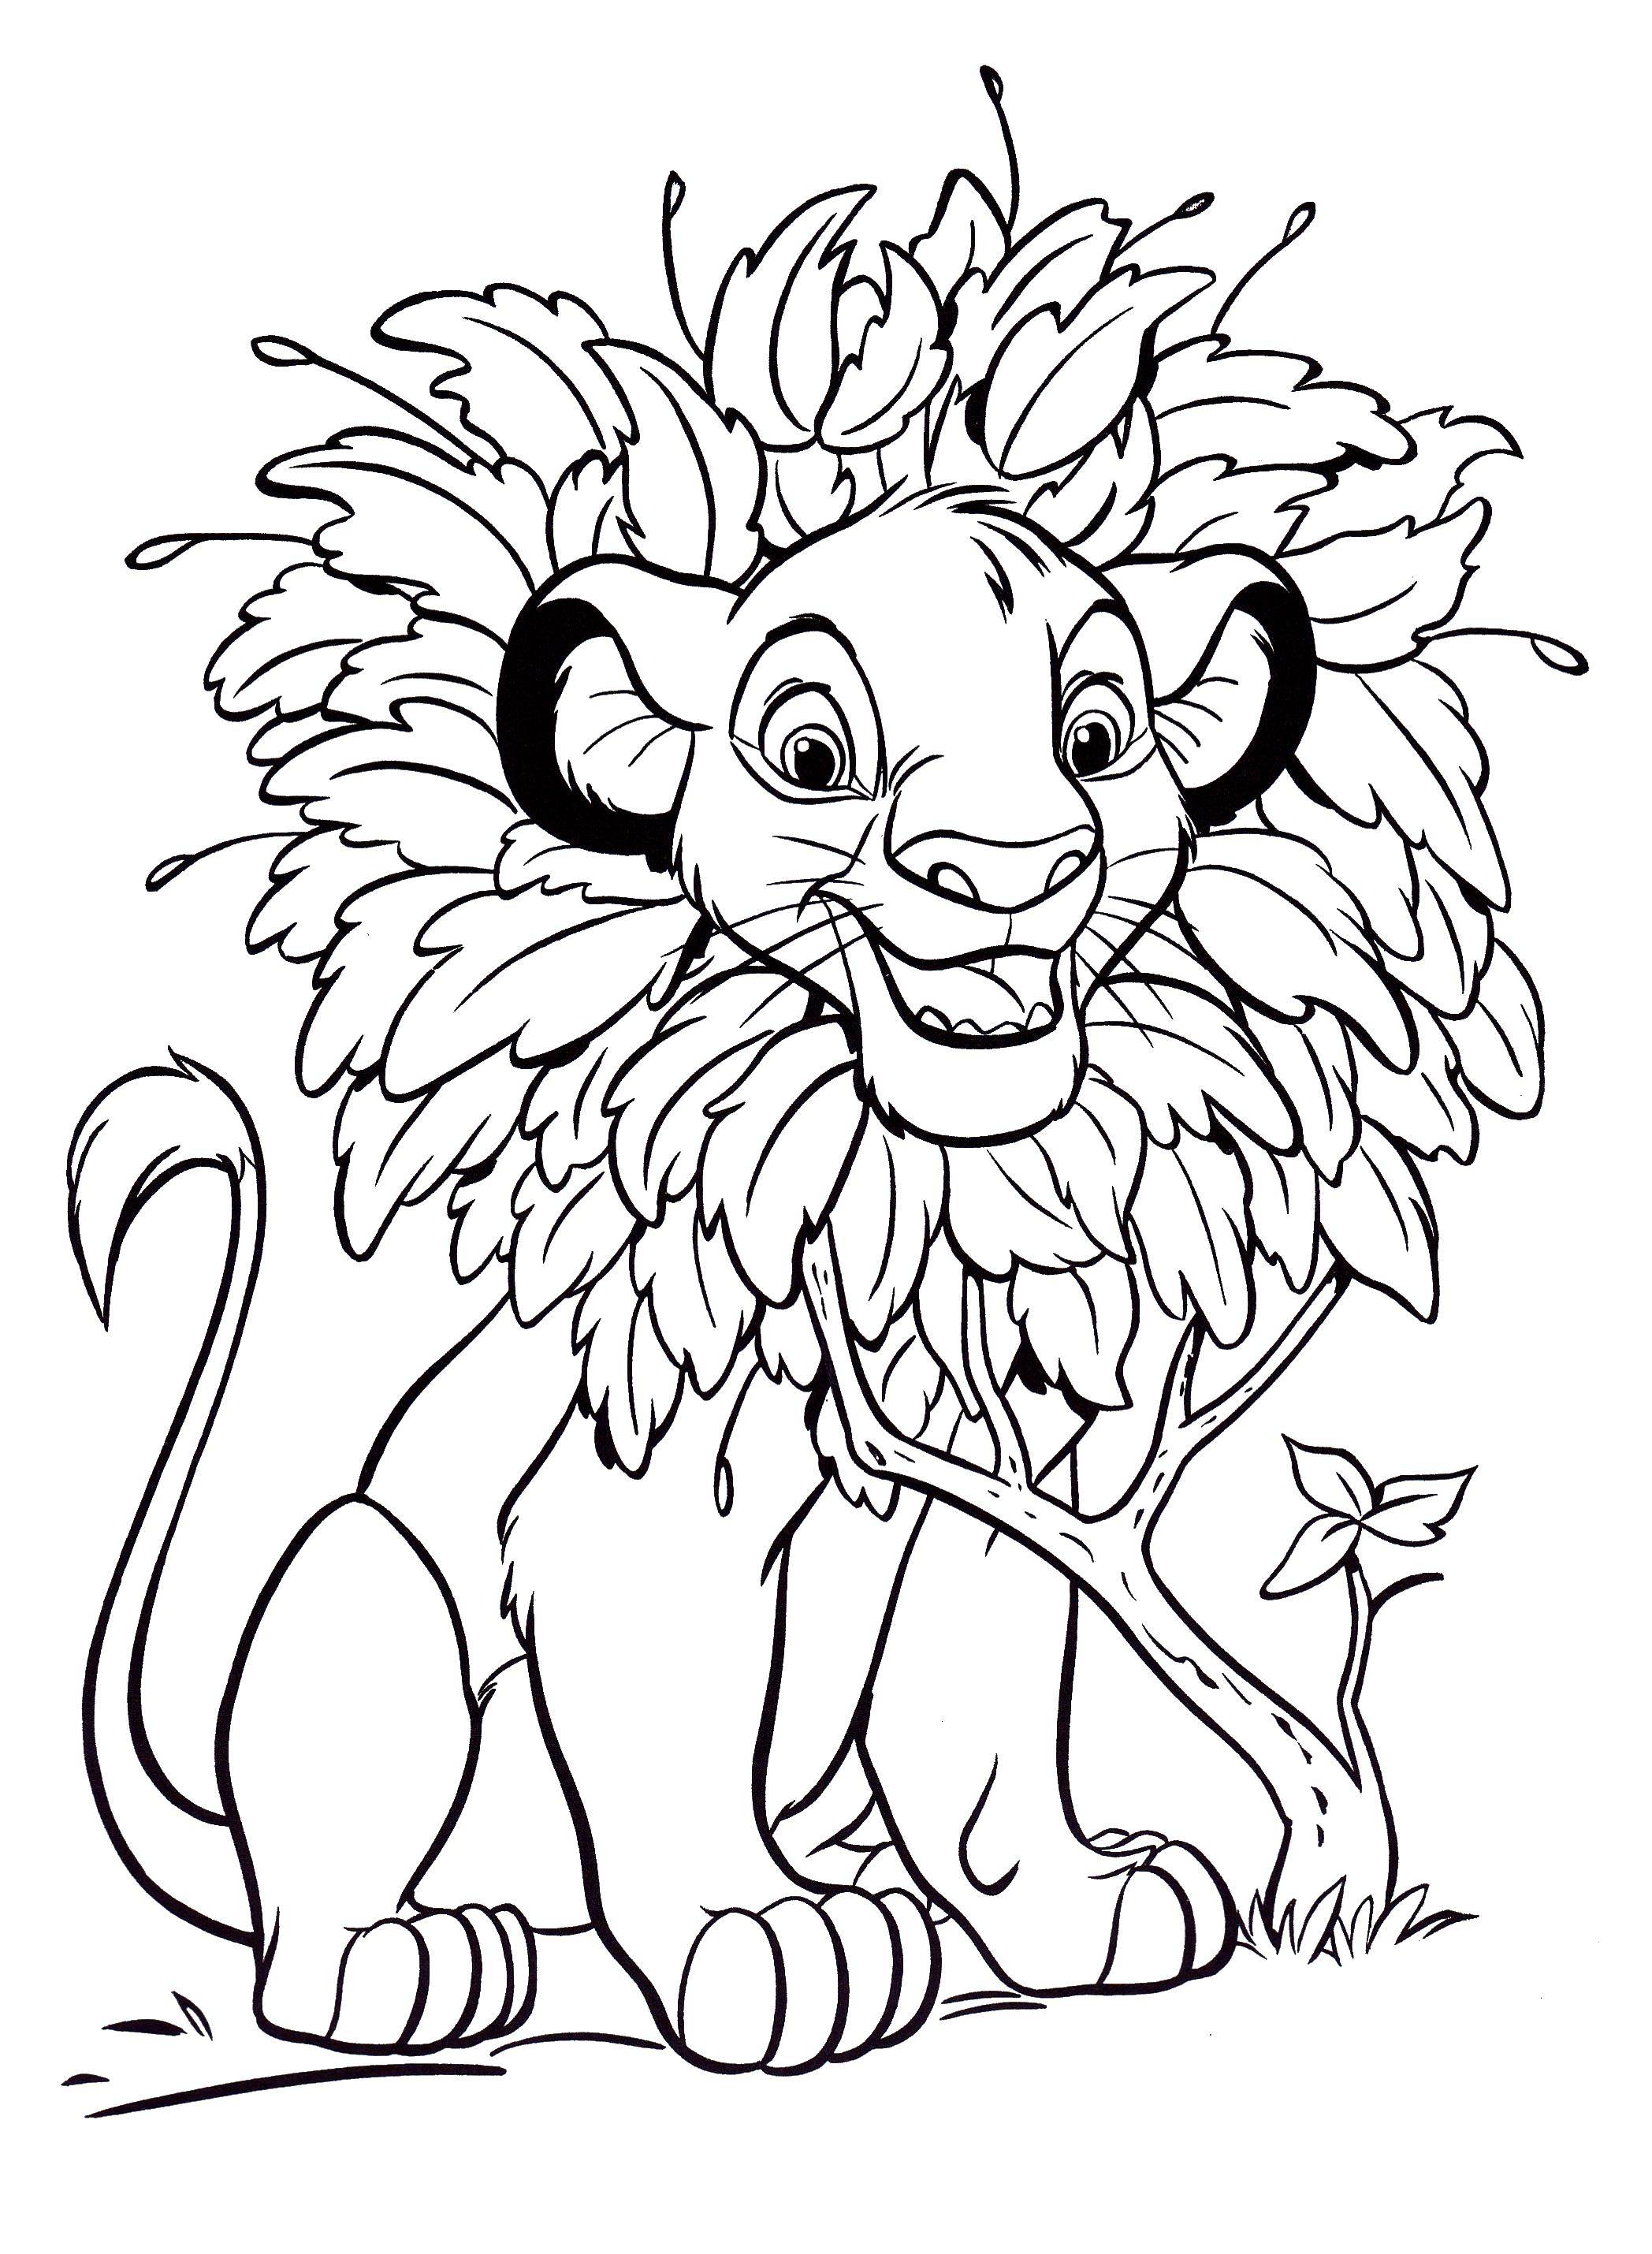 Coloring Simba plays. Category Disney coloring pages. Tags:  Simba, Nala, the lion King.